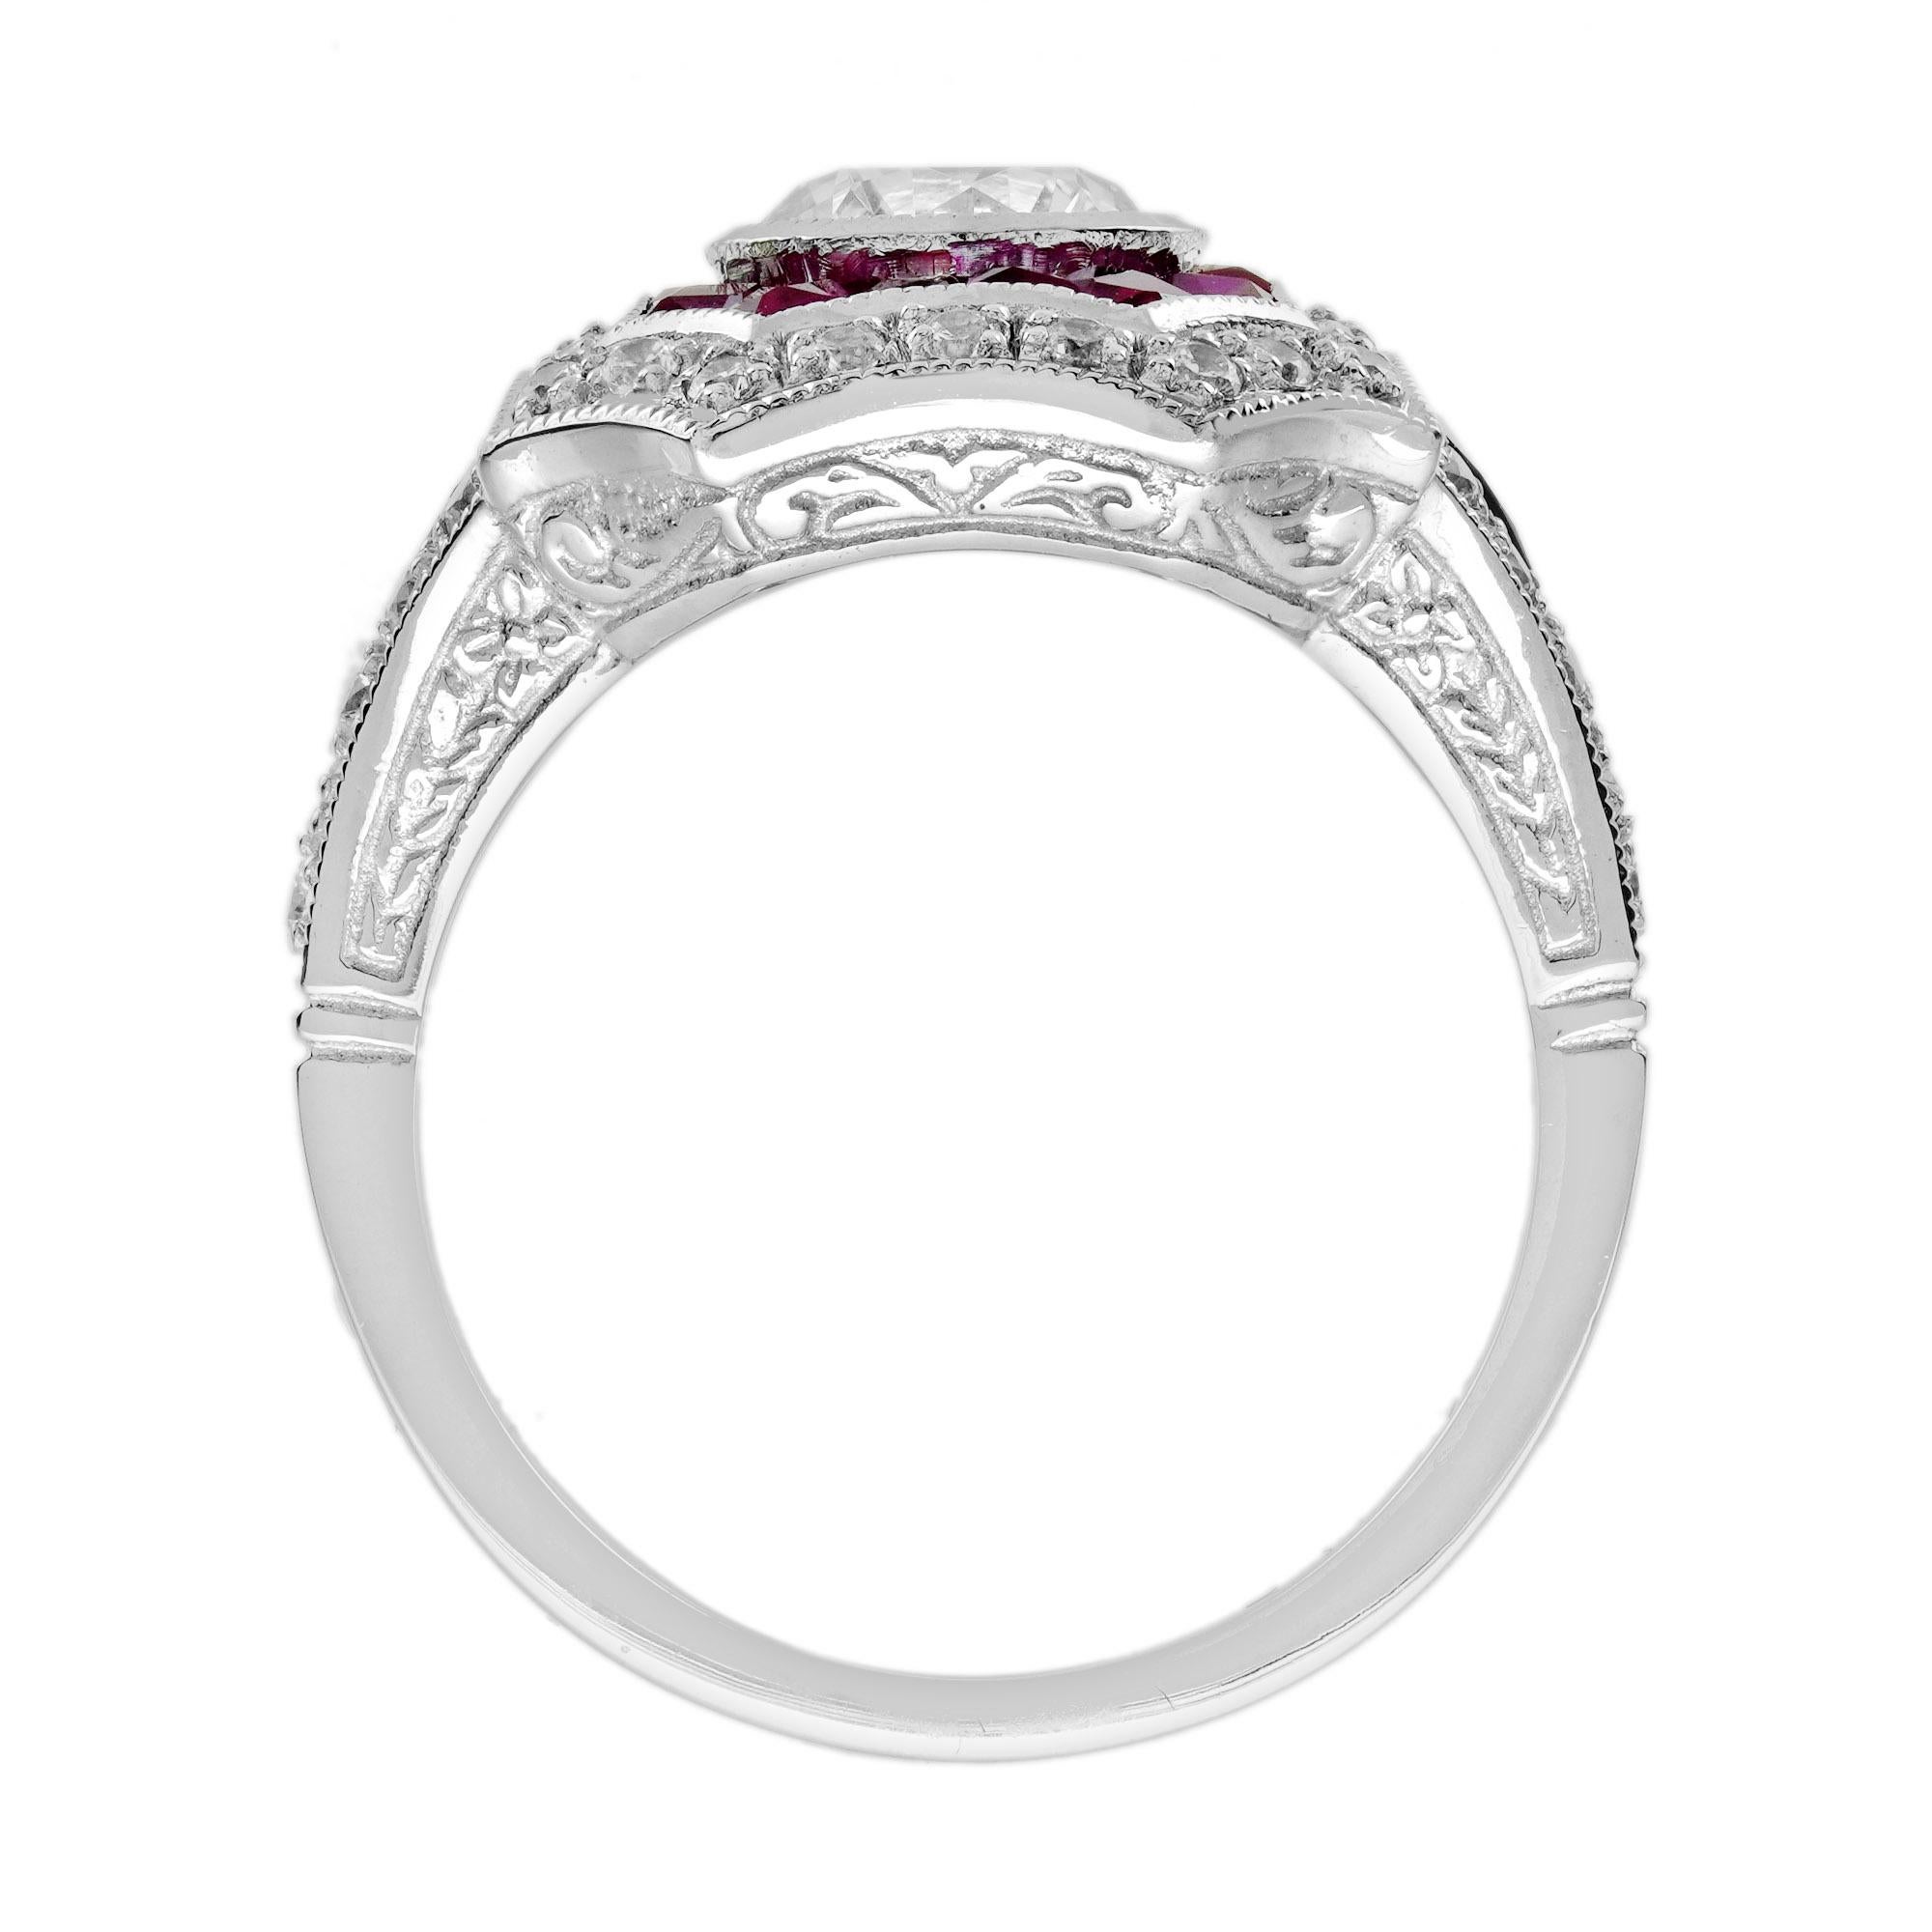 1 Ct. Diamond and Ruby Art Deco Style Engagement Ring in 18K White Gold For Sale 1